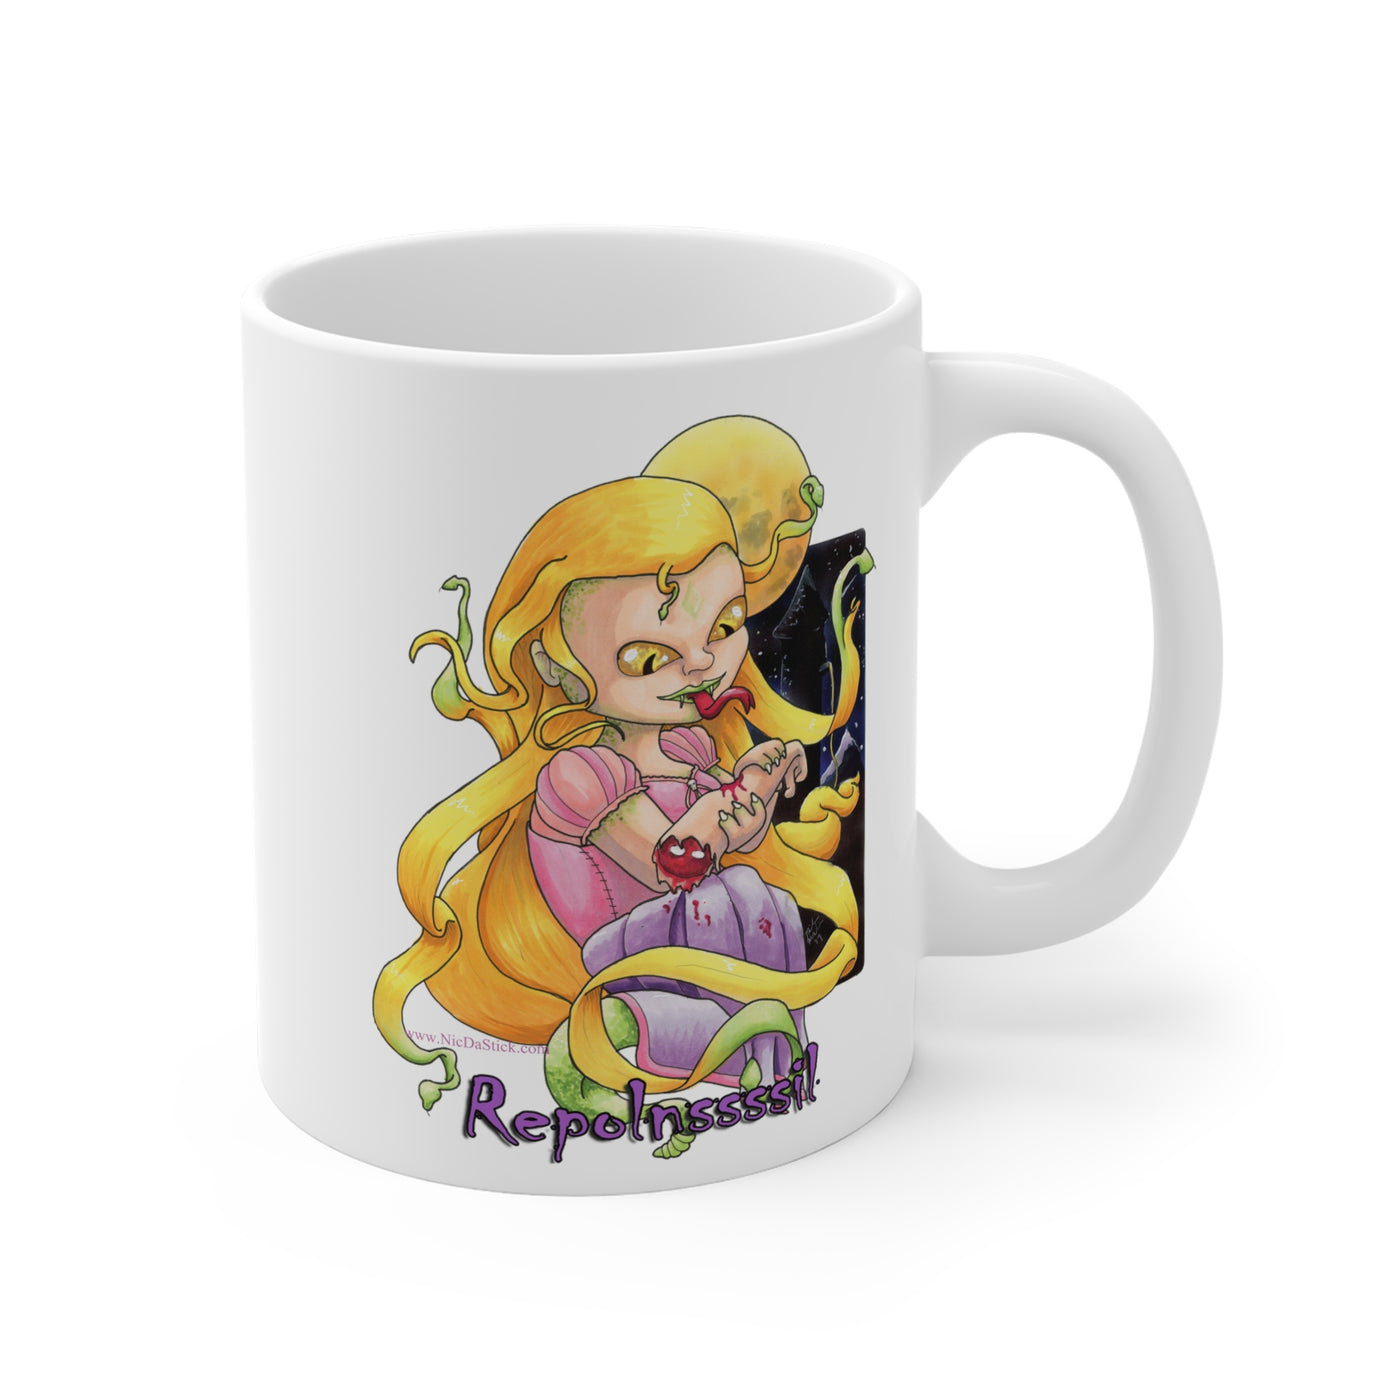 Reponsssil Scary Tales Series 2 Mug - Various Sizes 11-20 Oz